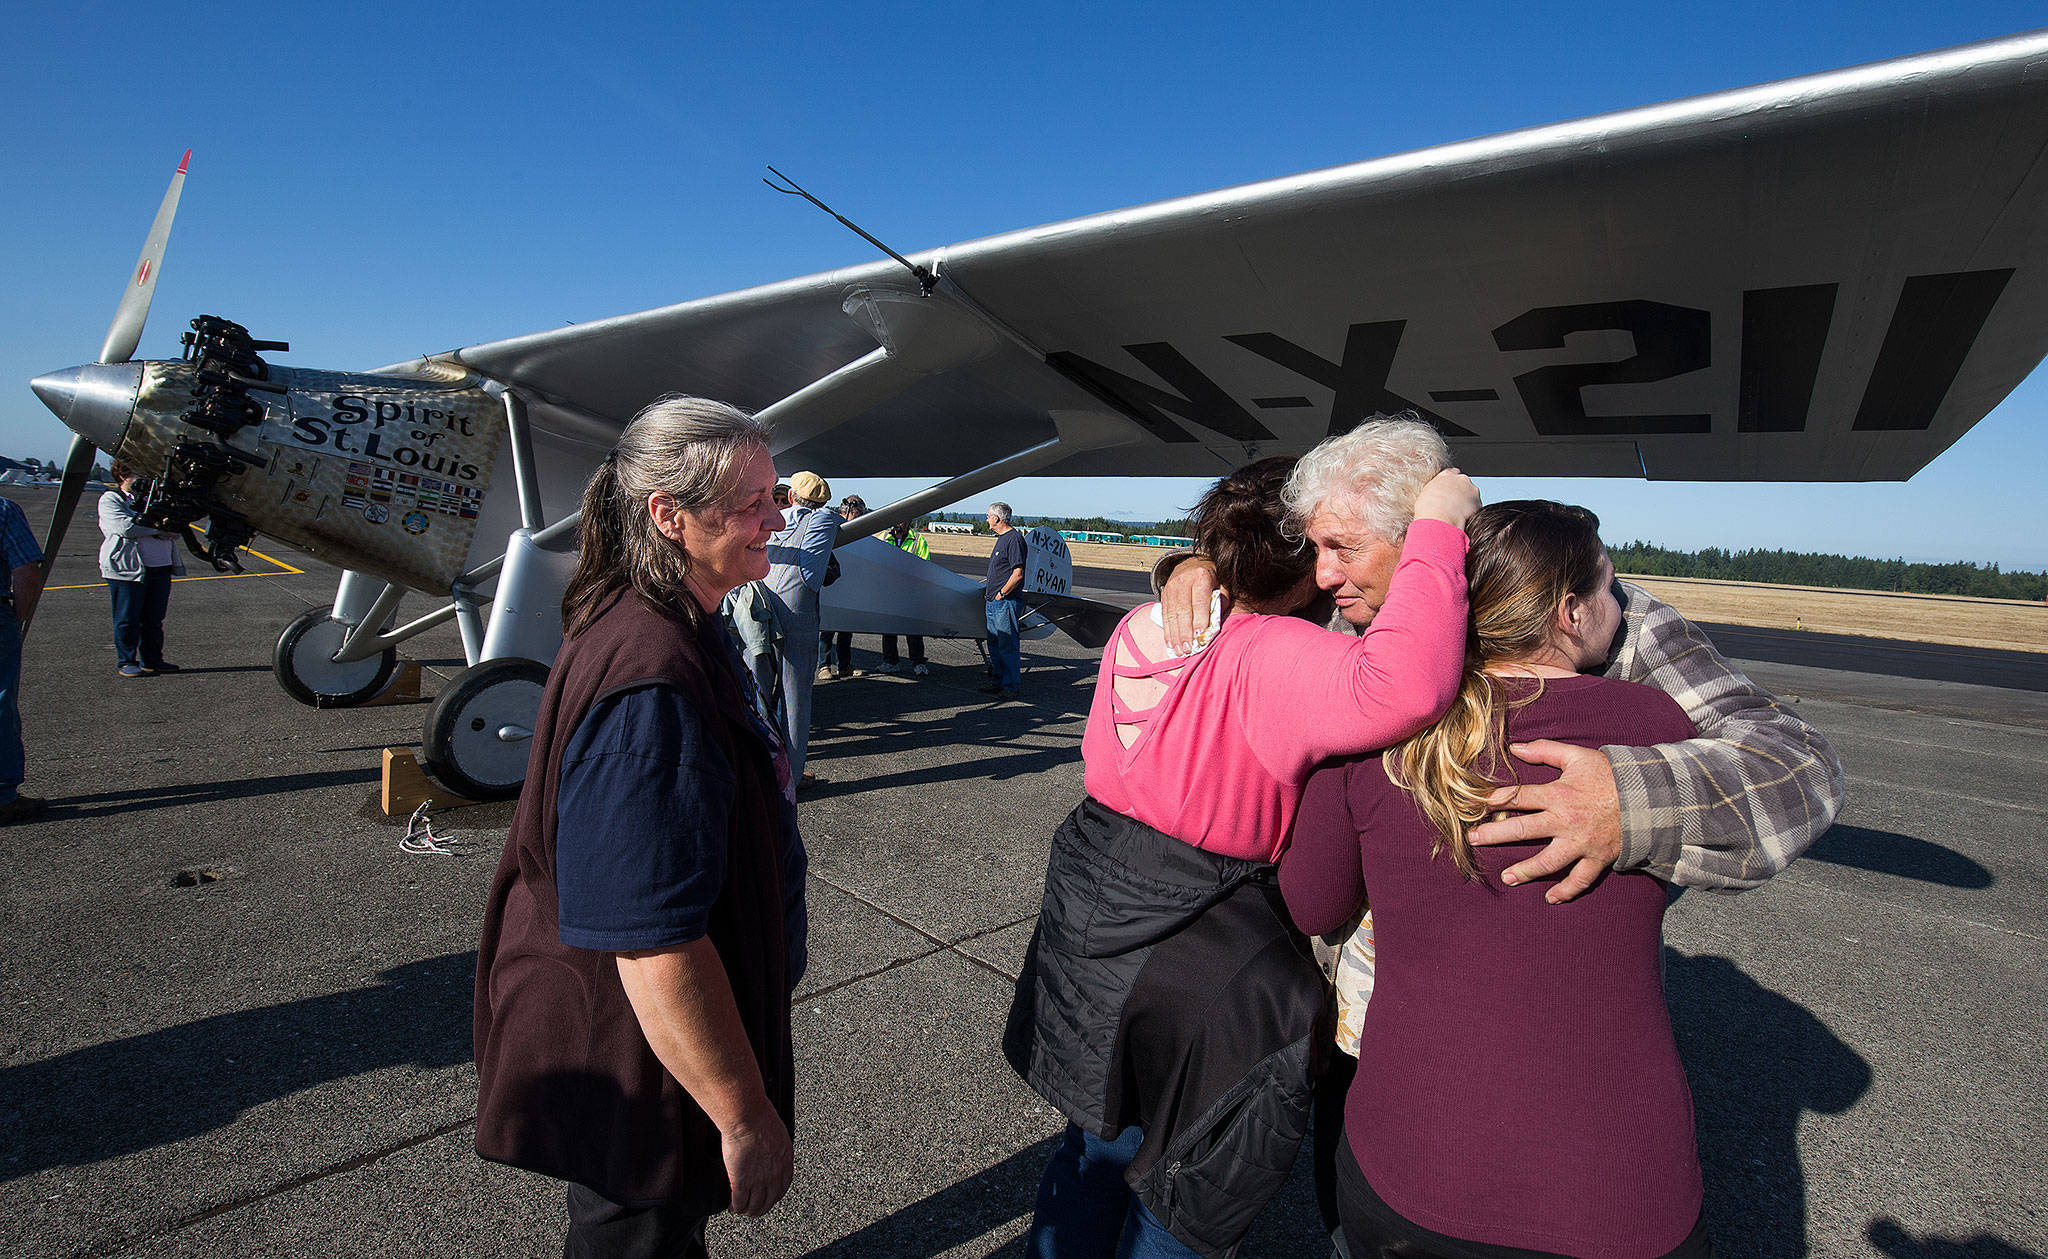 As his wife, Heather, looks on, John Norman gets a hug from his daughter Amber Nelson and granddaughter Ashlee Nelson (right) after his replica of the Spirit of St. Louis flew for the first time from Arlington Municipal Airport on July 28. (Andy Bronson / The Herald)